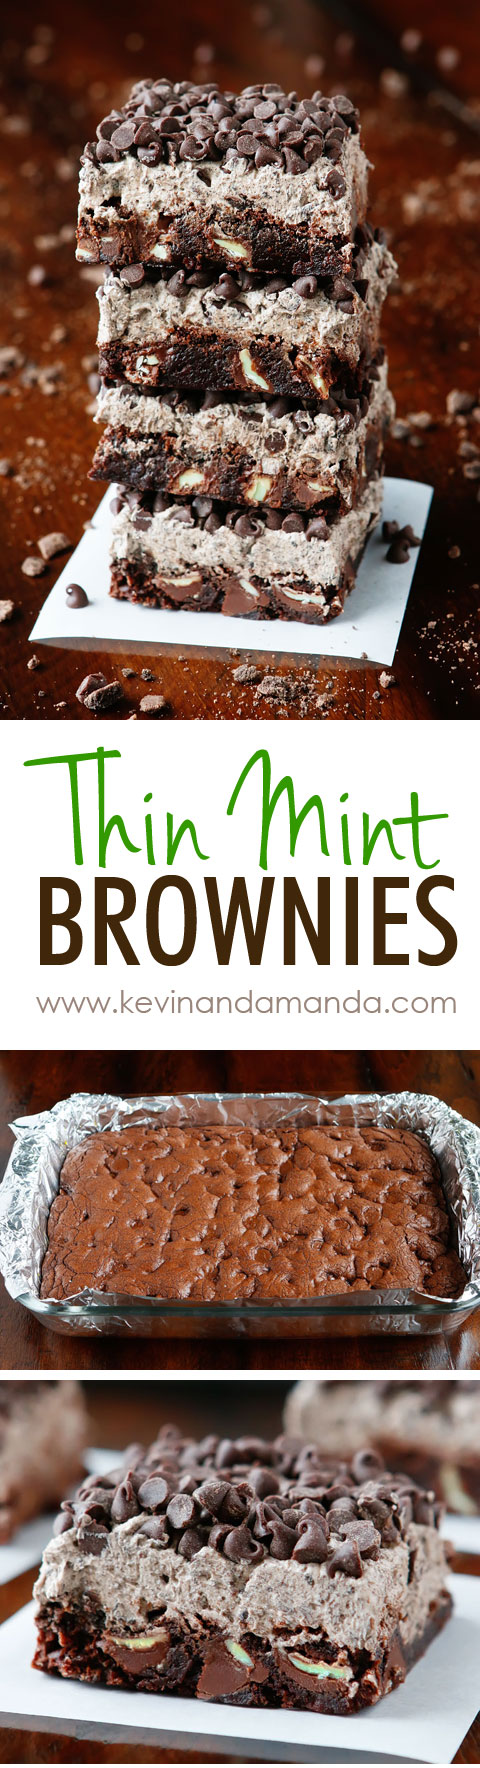 Thin Mint Brownies made with Thin Mint Cookies! These are SO good! Super fudgy brownies with Thin Mint Buttercream Frosting. You can make these even if you don't have Thin Mints on hand. 